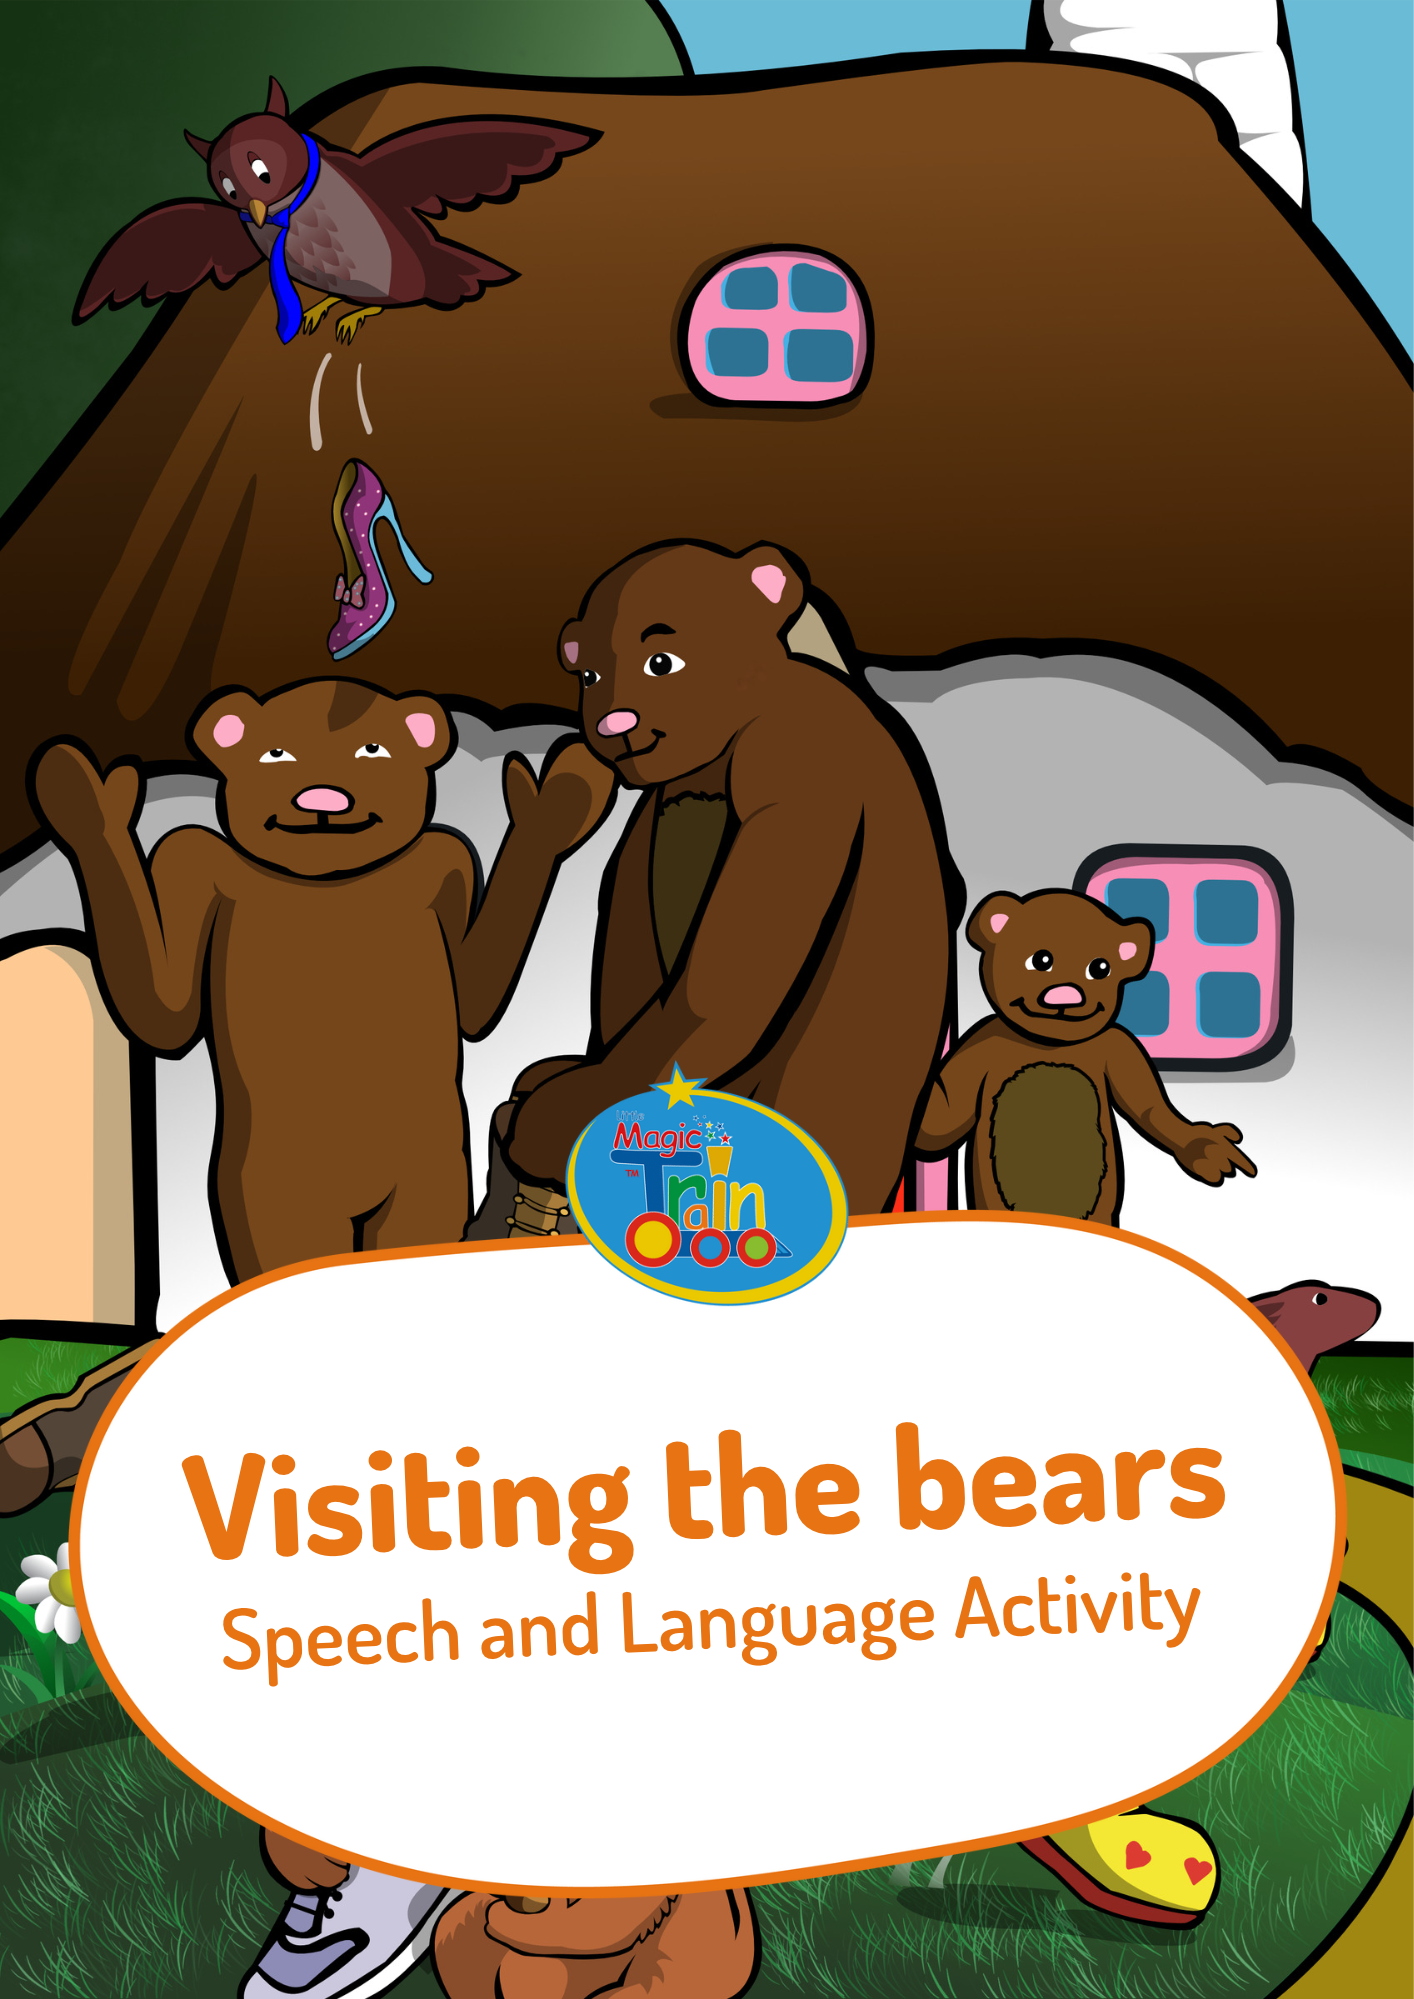 shop image Visiting the bears Speech and Language Activity